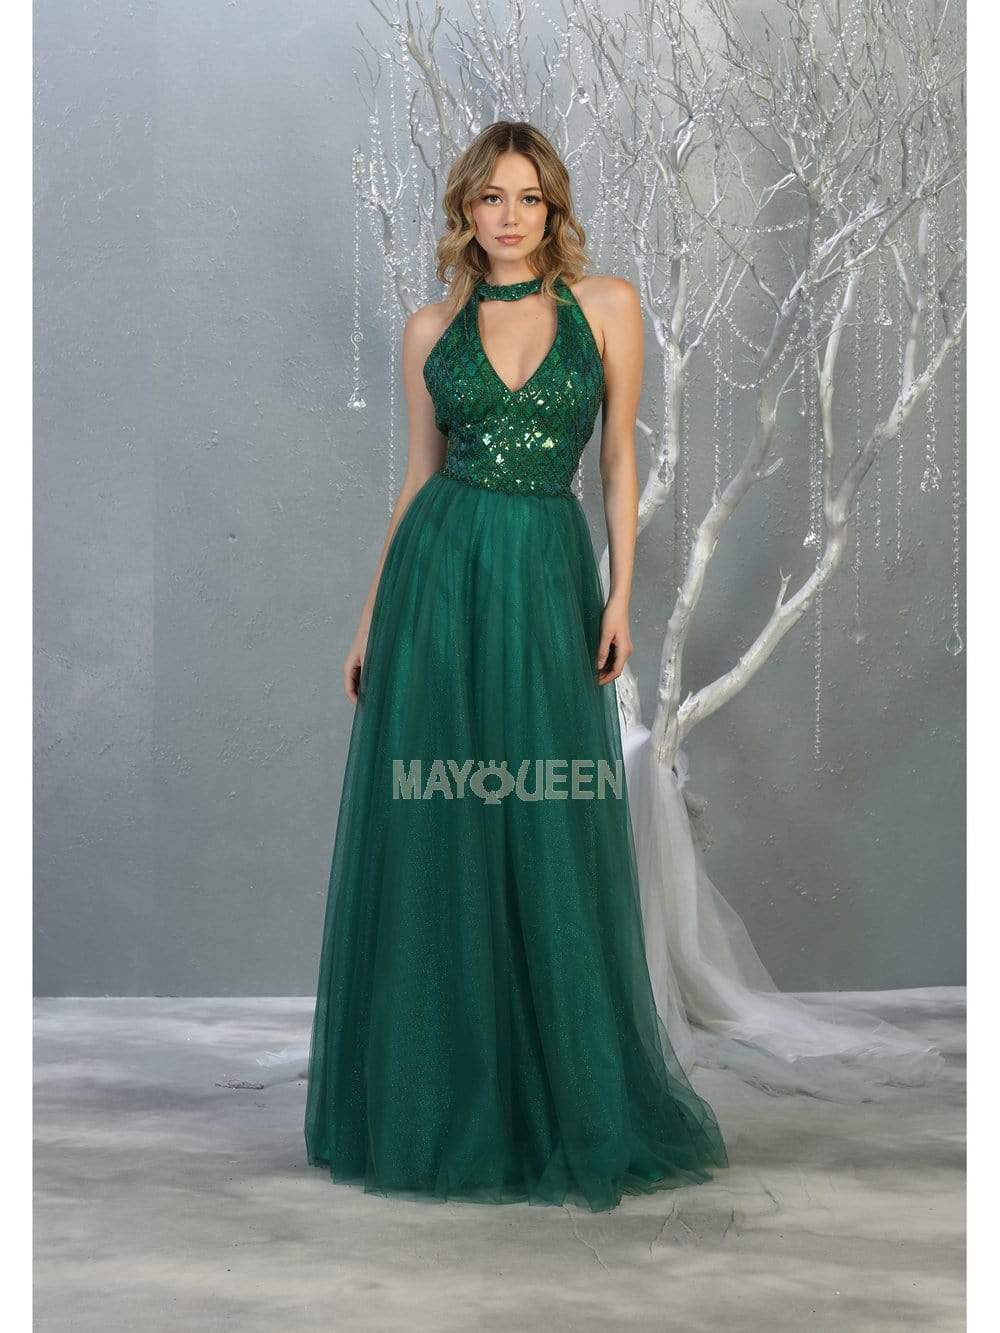 May Queen - RQ7863 Strappy High Halter A-Line Gown Prom Dresses 4 / Hunter-Grn